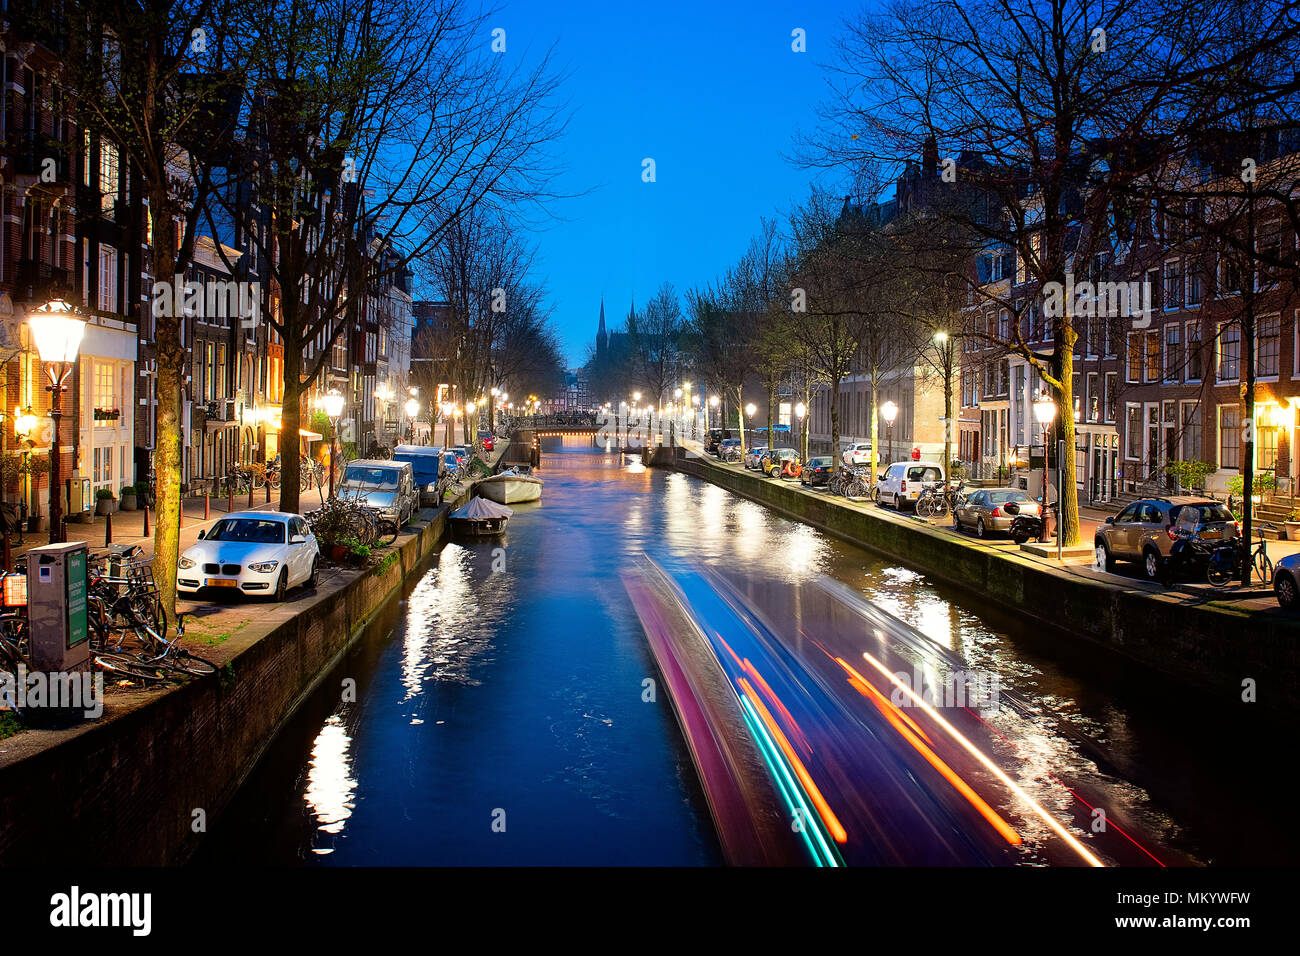 Amsterdam, Leidsegracht Canal at Night Stock Photo